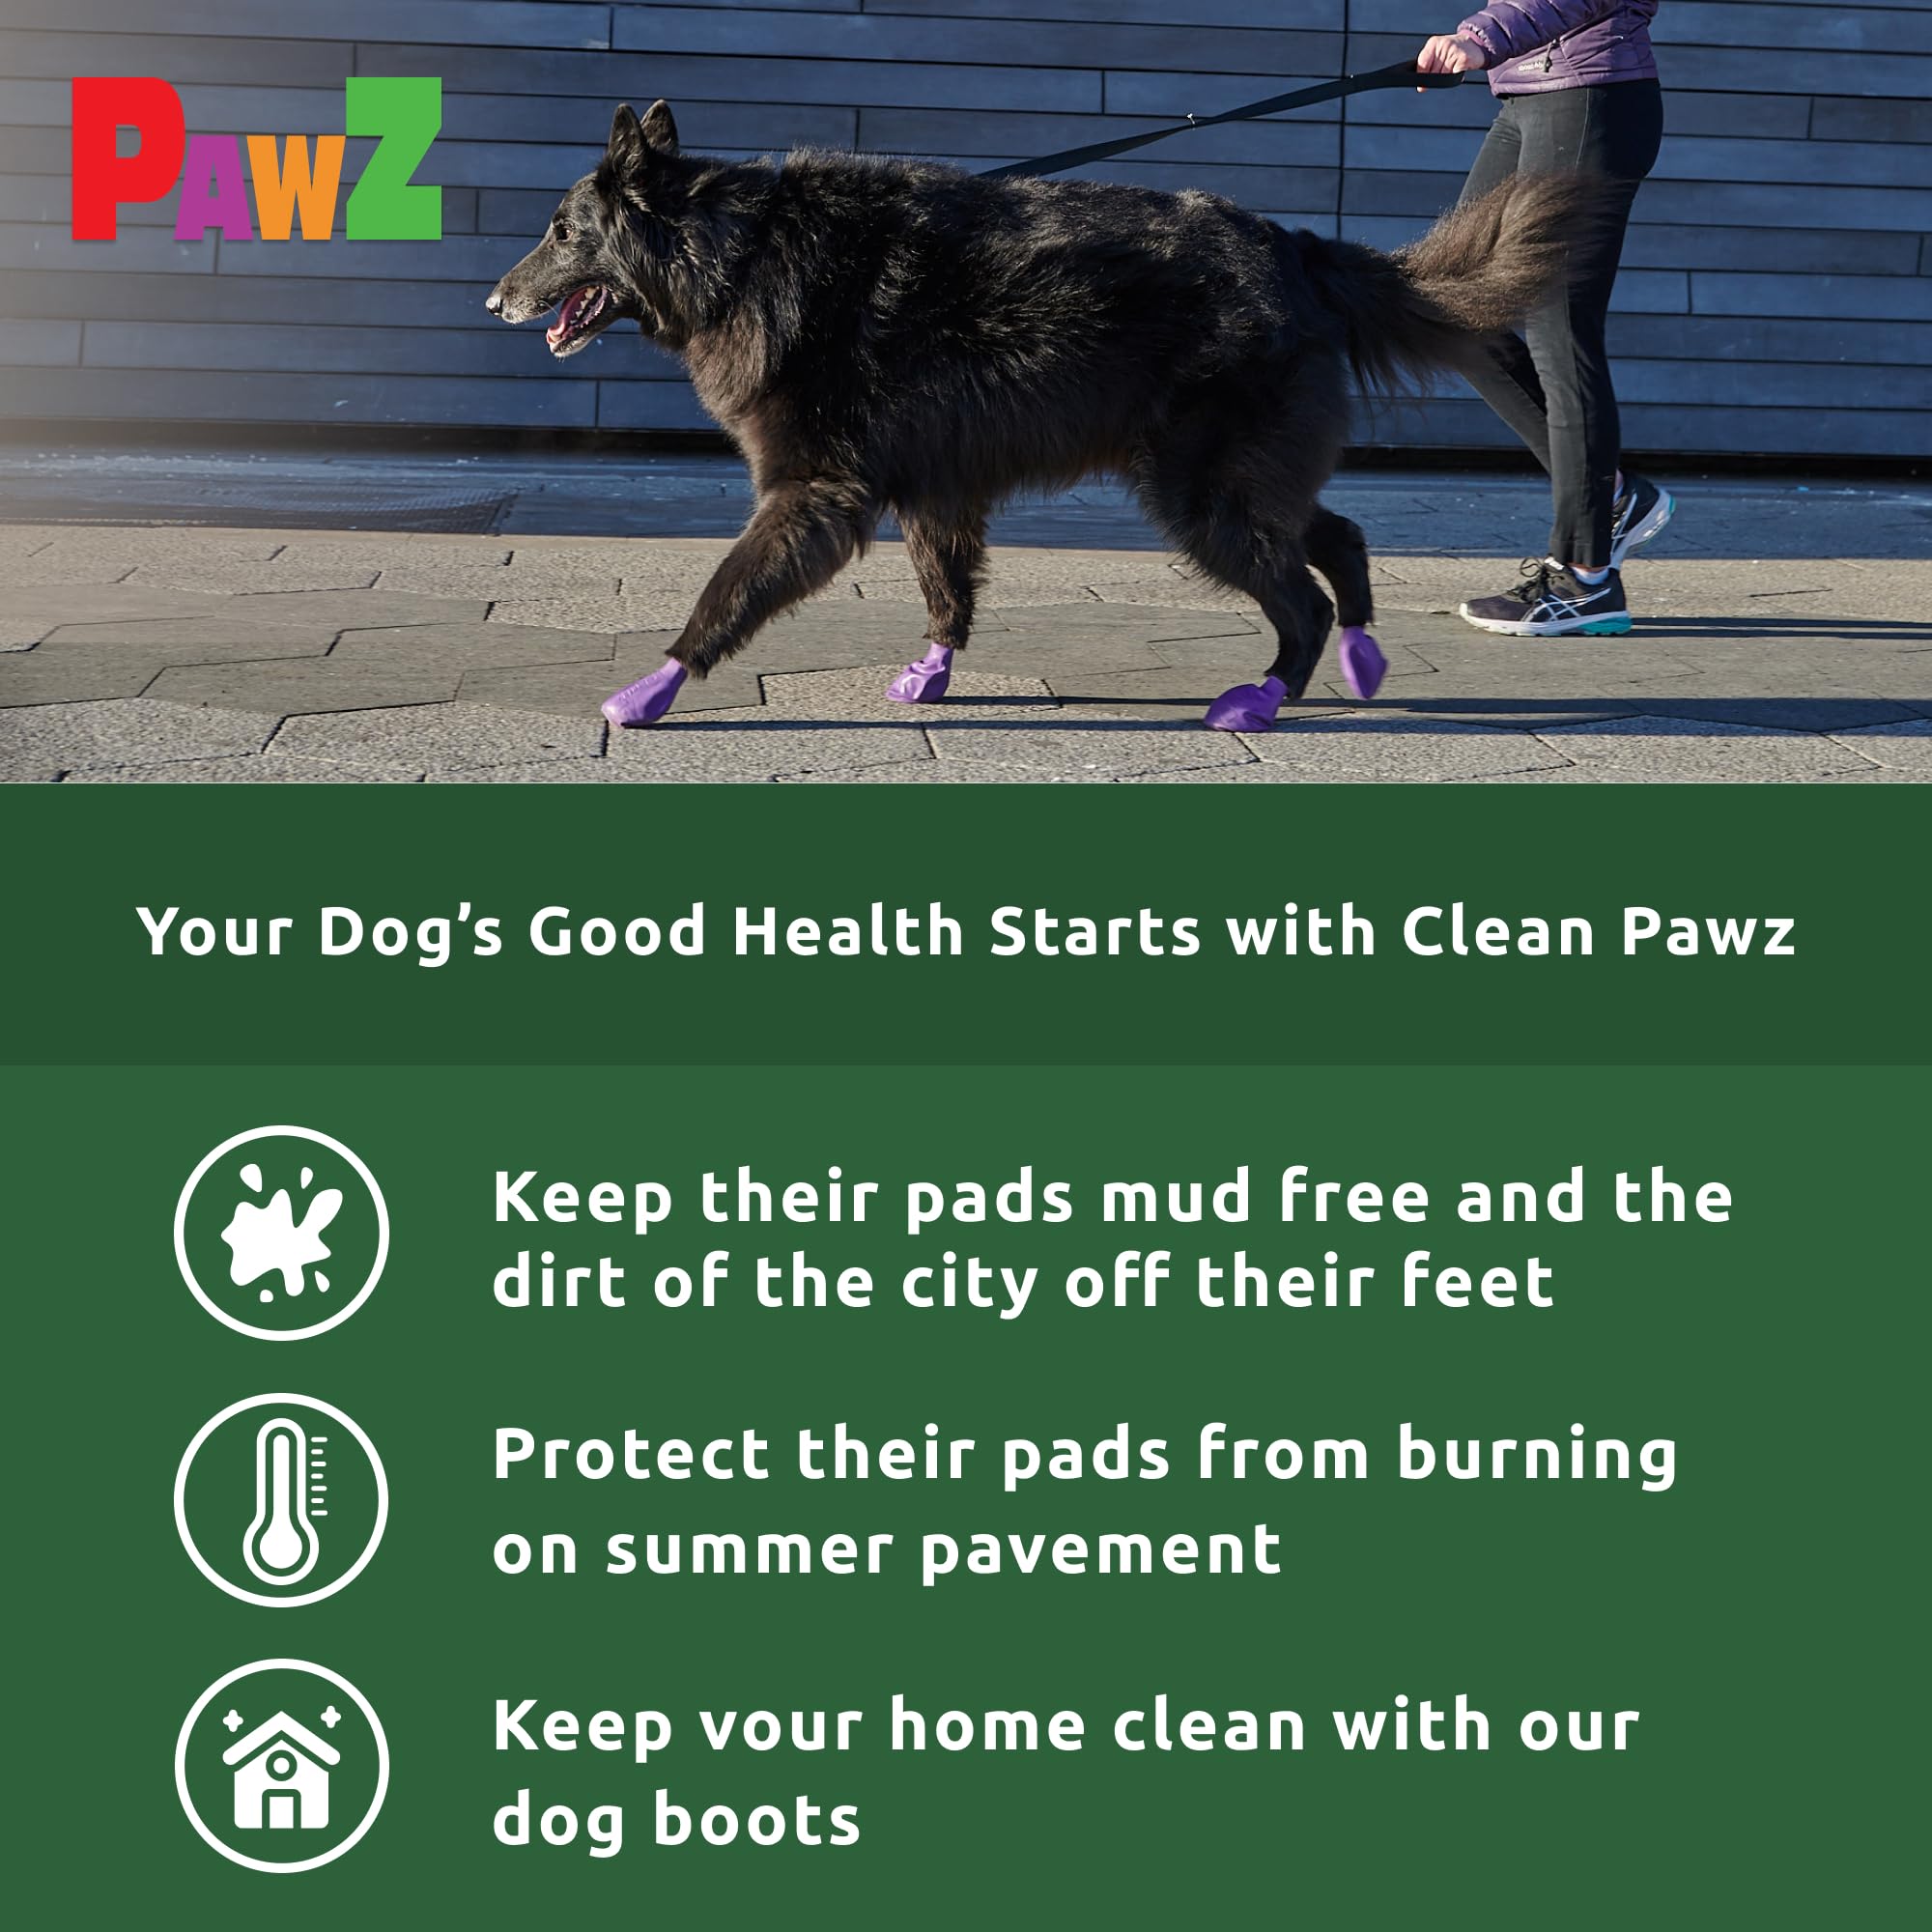 Pawz Waterproof Disposable and Reusable Rubberized Dog Boots - Dark Green - X-Large - 12 Pack  